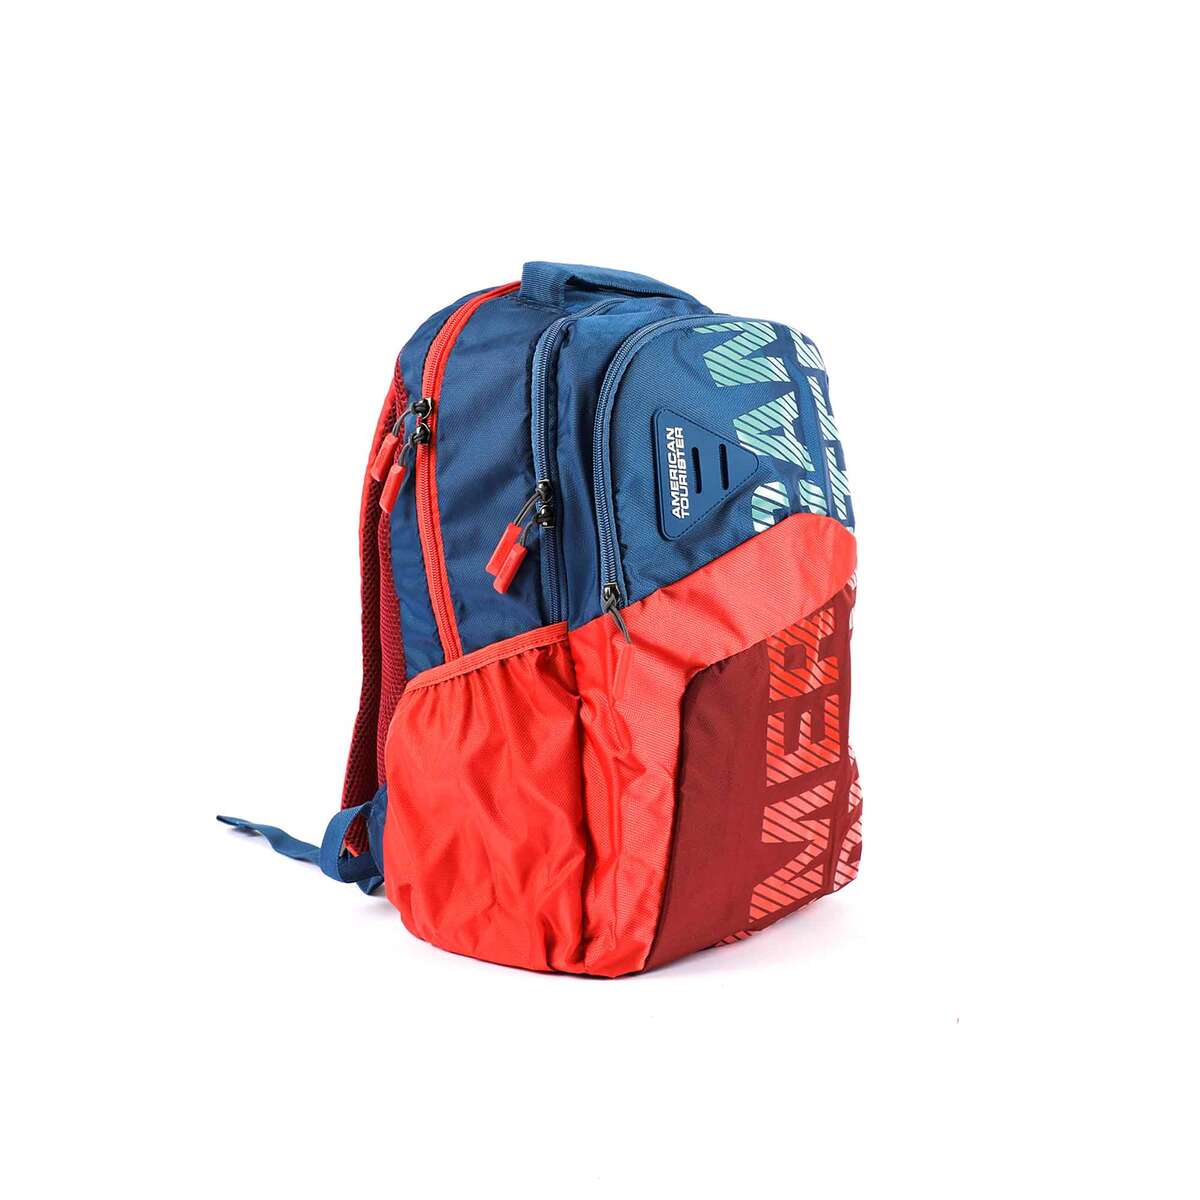 American Tourister Backpack 51001 19" Blue&Red